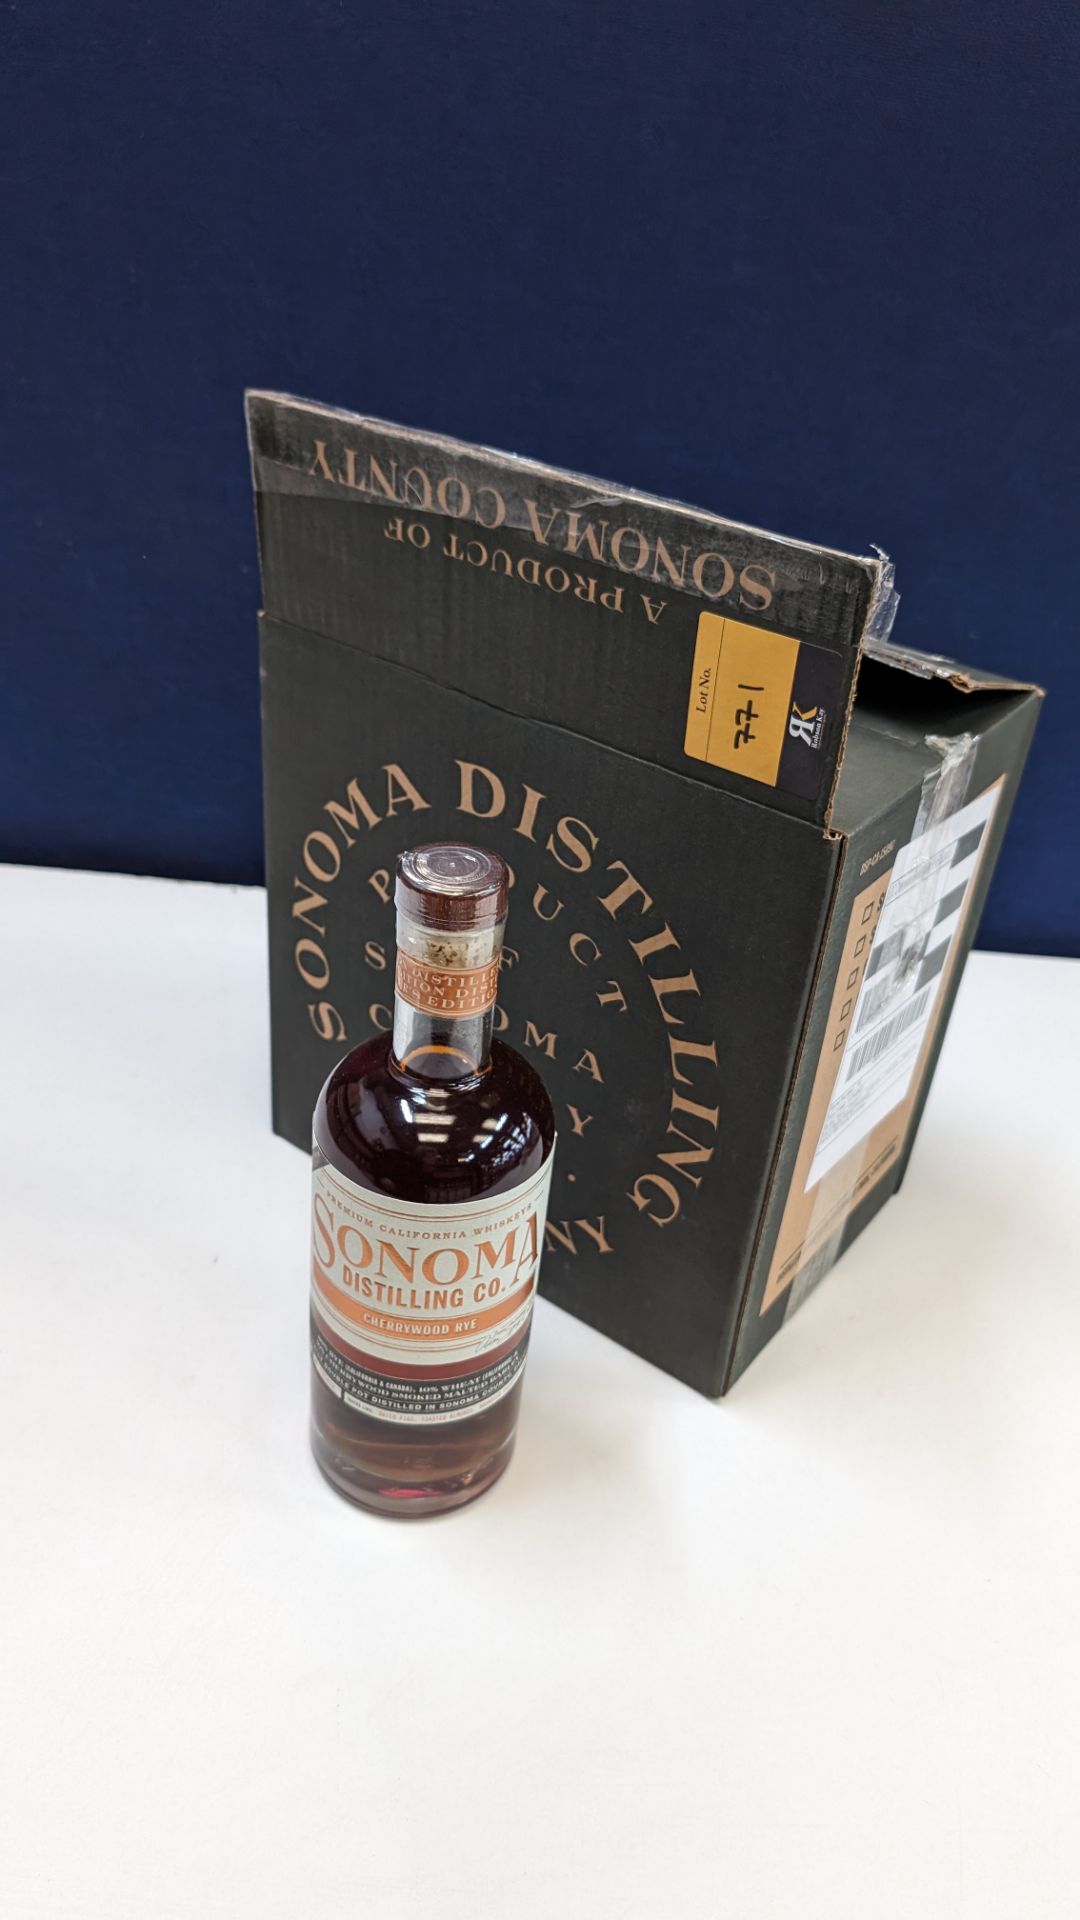 6 off 700ml bottles of Sonoma Cherrywood Rye Whiskey. In Sonoma branded box which includes bottling - Image 5 of 6